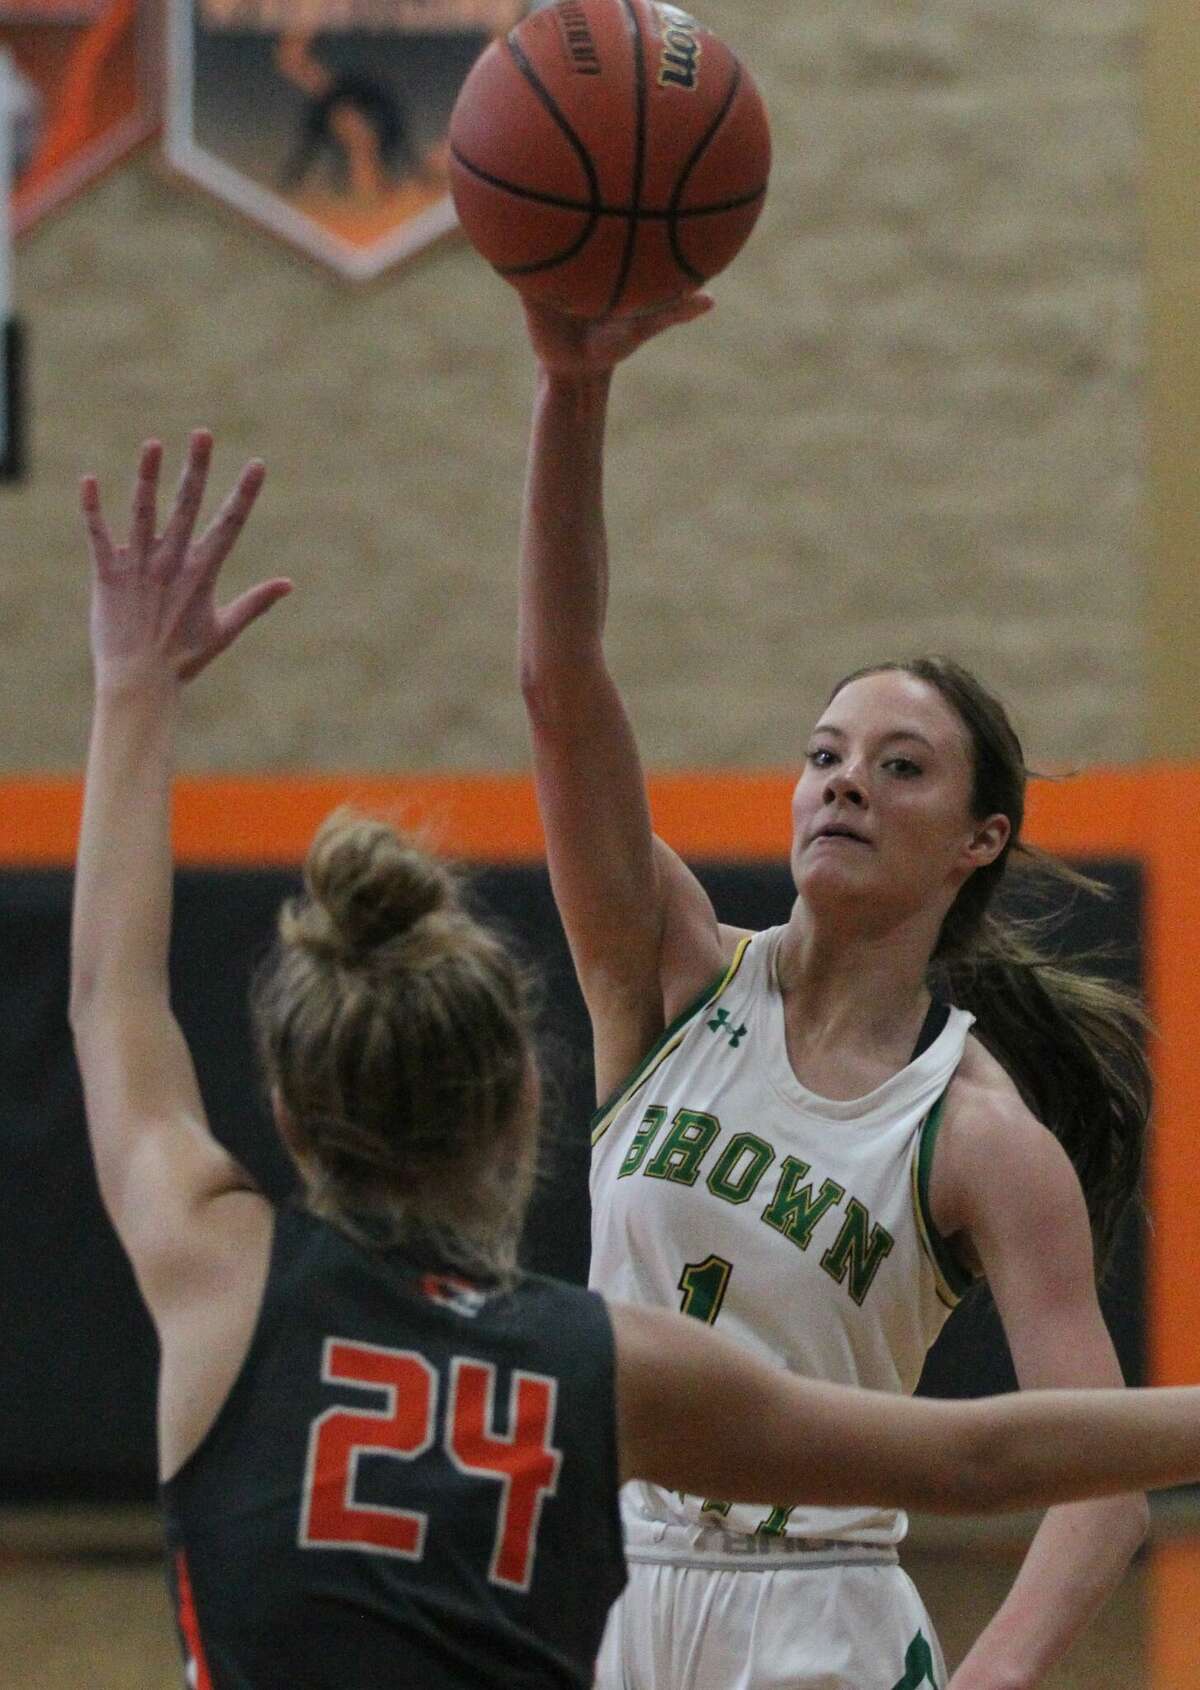 Action from the Brown County girls' basketball team's win over Illini Bluffs Tuesday in the quarterfinals of the Beardstown Lady Tiger Classic